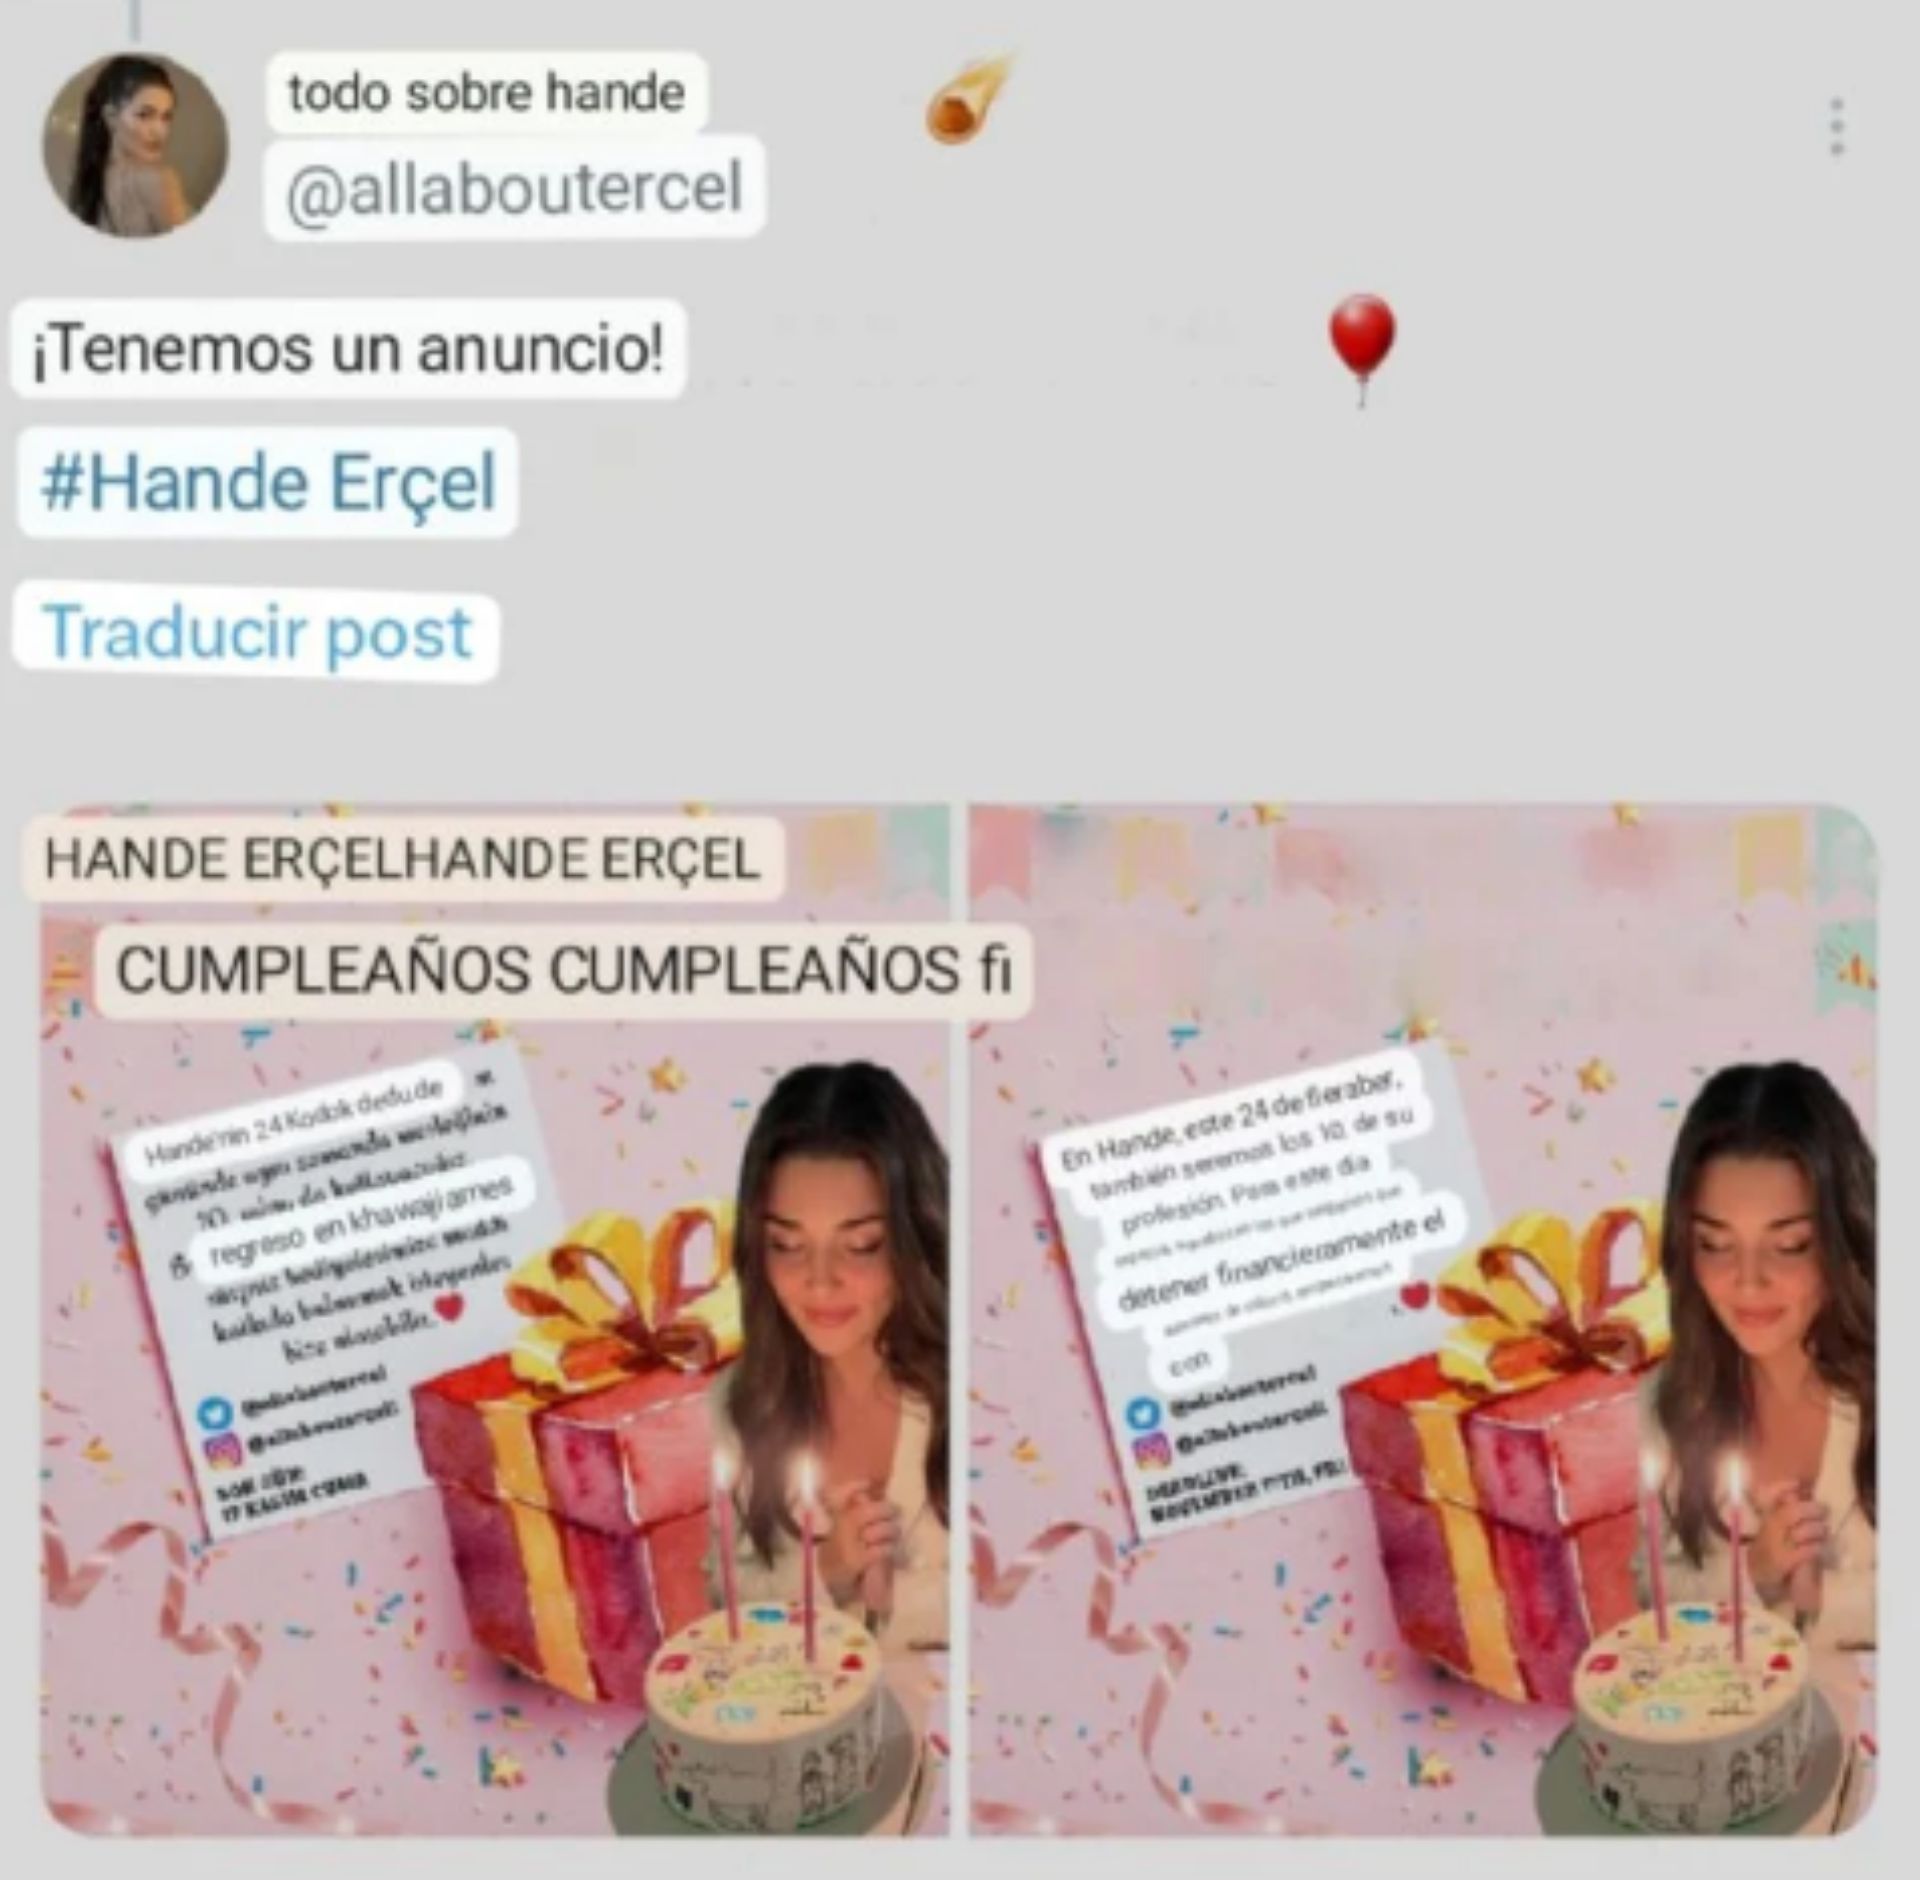 High move: Hande Erçel's birthday is coming up and his fans are organizing a global solidarity event